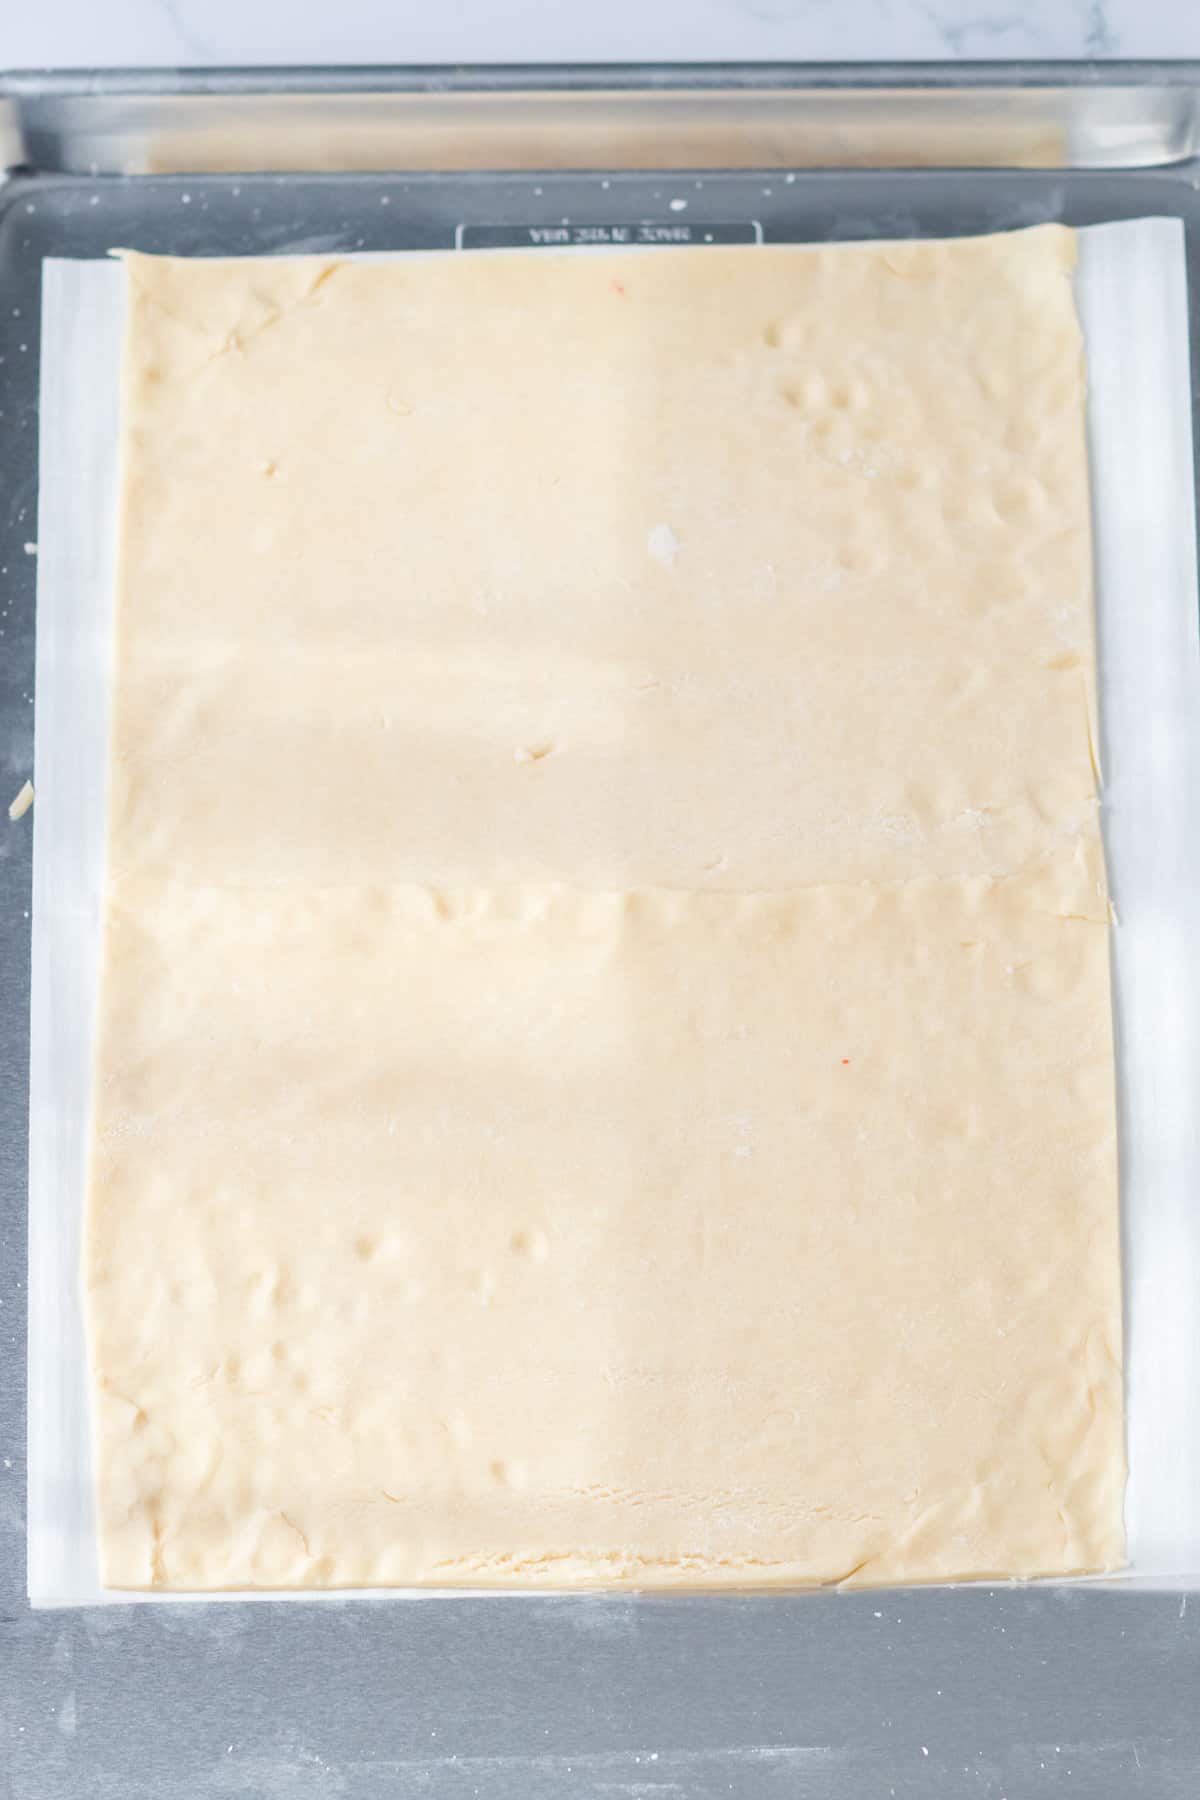 Rectangular pie crust on parchment lined baking sheet.